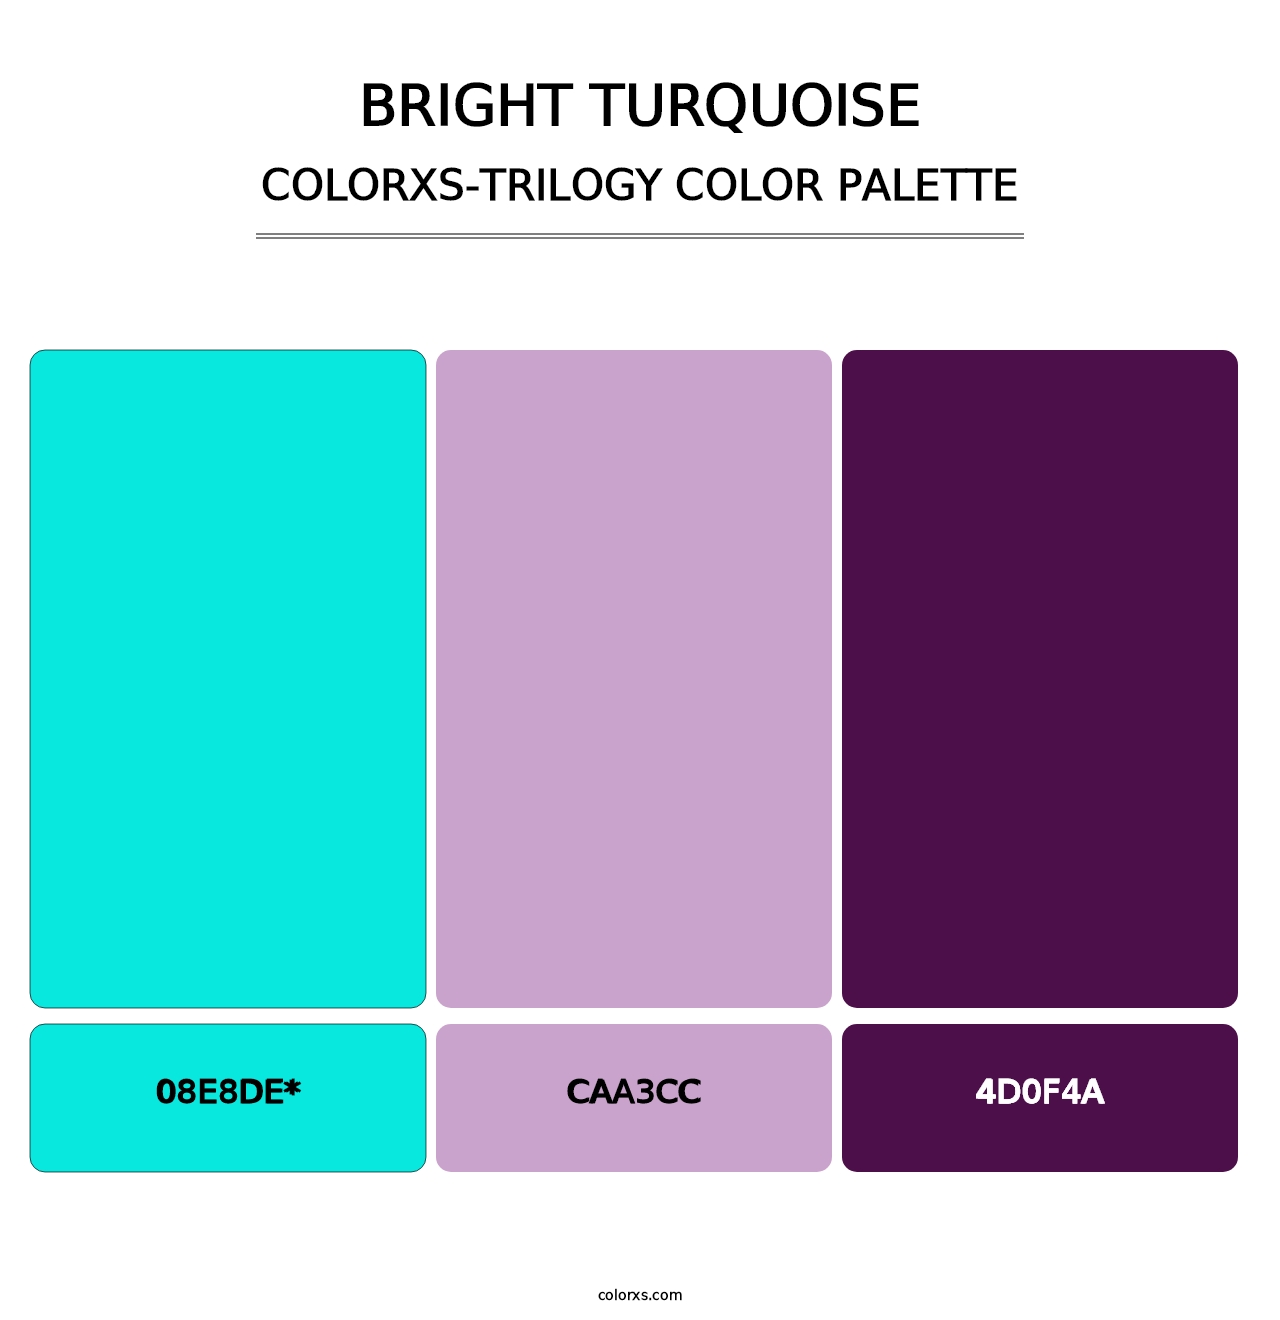 Bright Turquoise - Colorxs Trilogy Palette